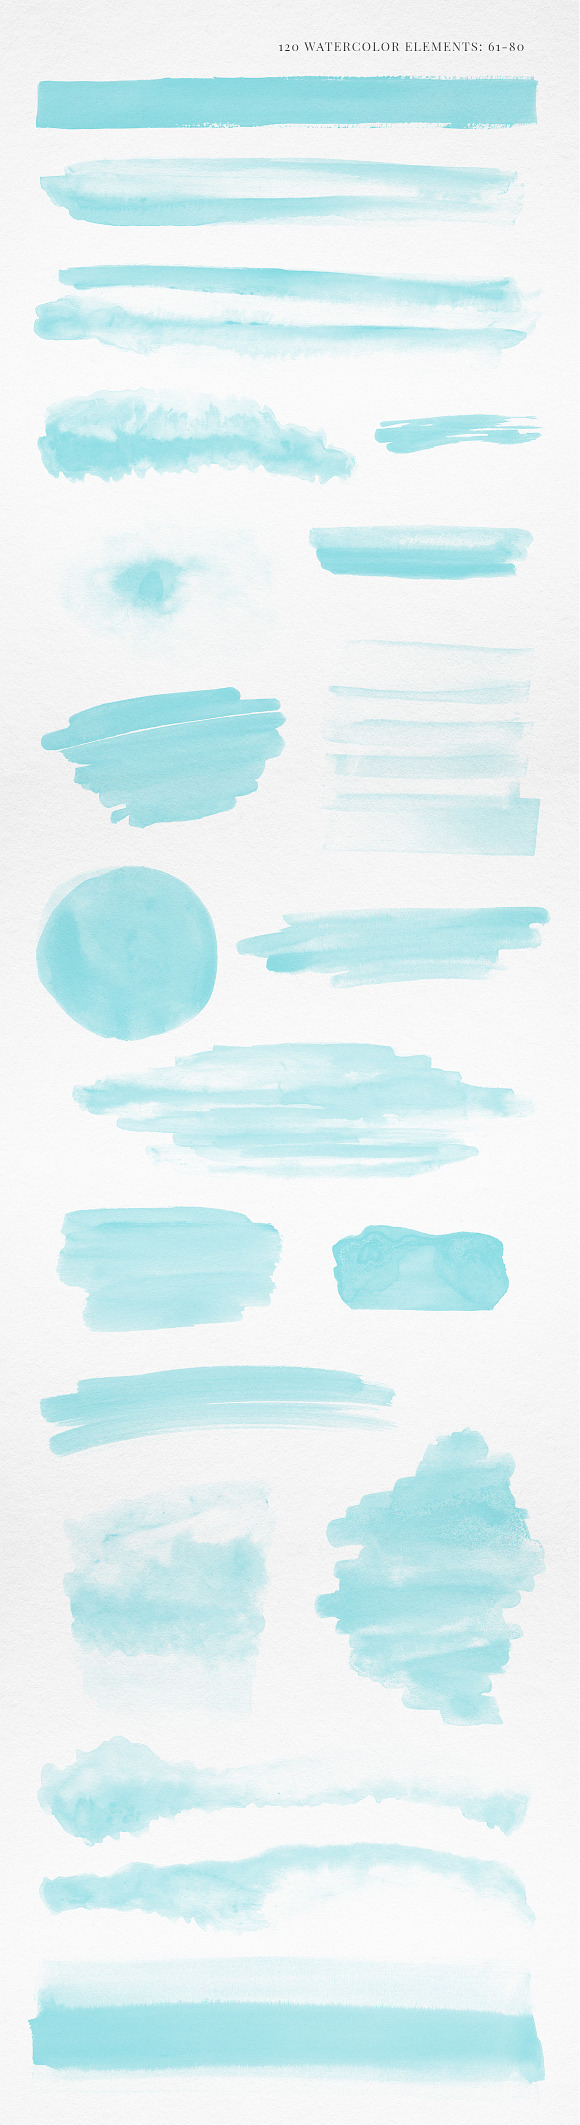 120 Watercolor Elements Turquoise in Textures - product preview 4